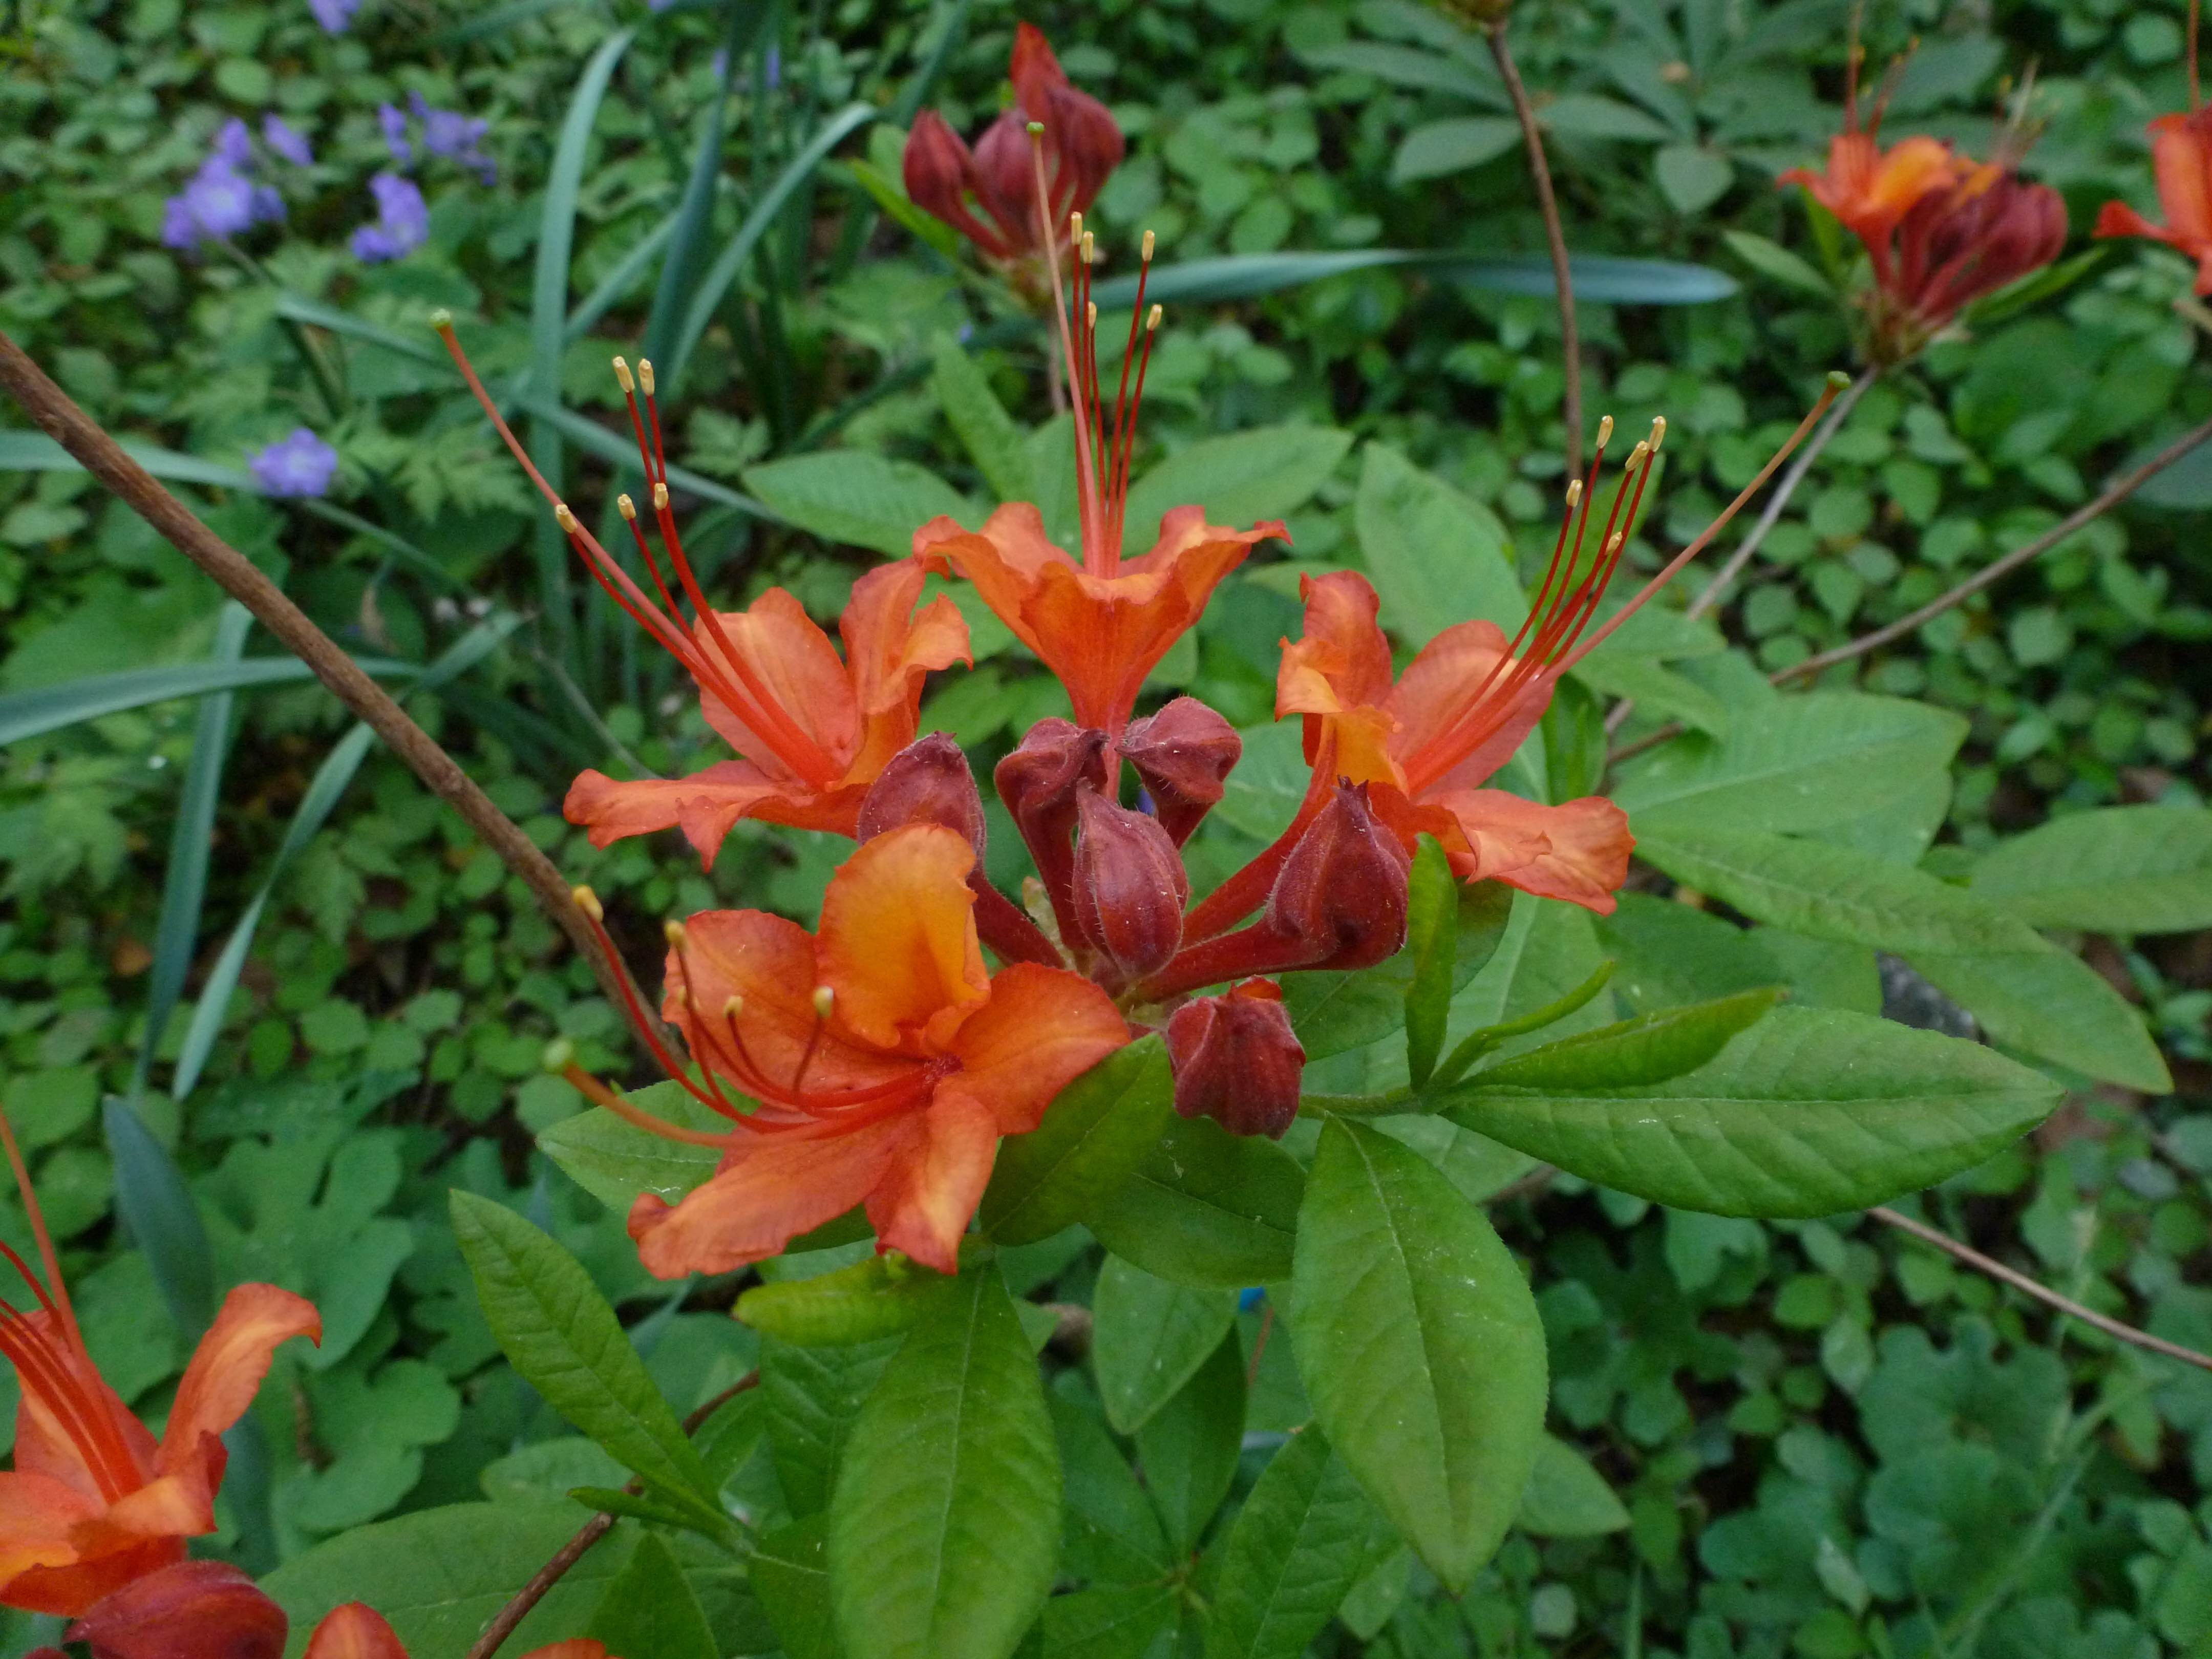 The Scientific Name is Rhododendron flammeumm [= Rhododendron speciosum]. You will likely hear them called Oconee Azalea, Piedmont Azalea. This picture shows the A medium-sized shrub blooming in mid spring with red-orange to yellow shades. of Rhododendron flammeumm [= Rhododendron speciosum]